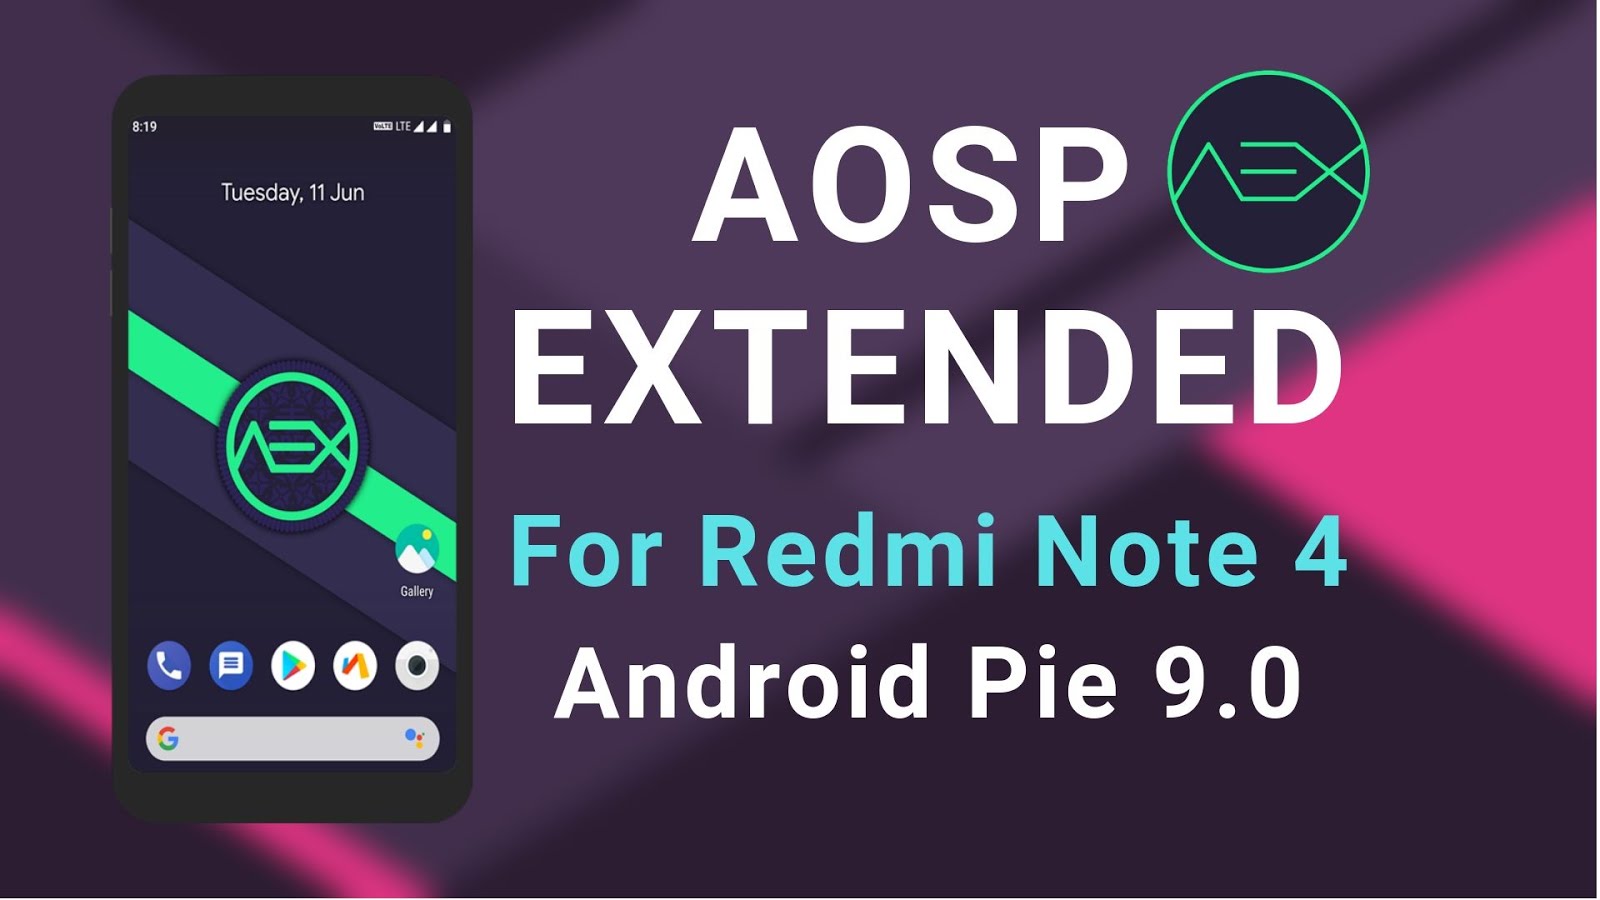 AOSP Extended Rom for Redmi Note 4 (mido)